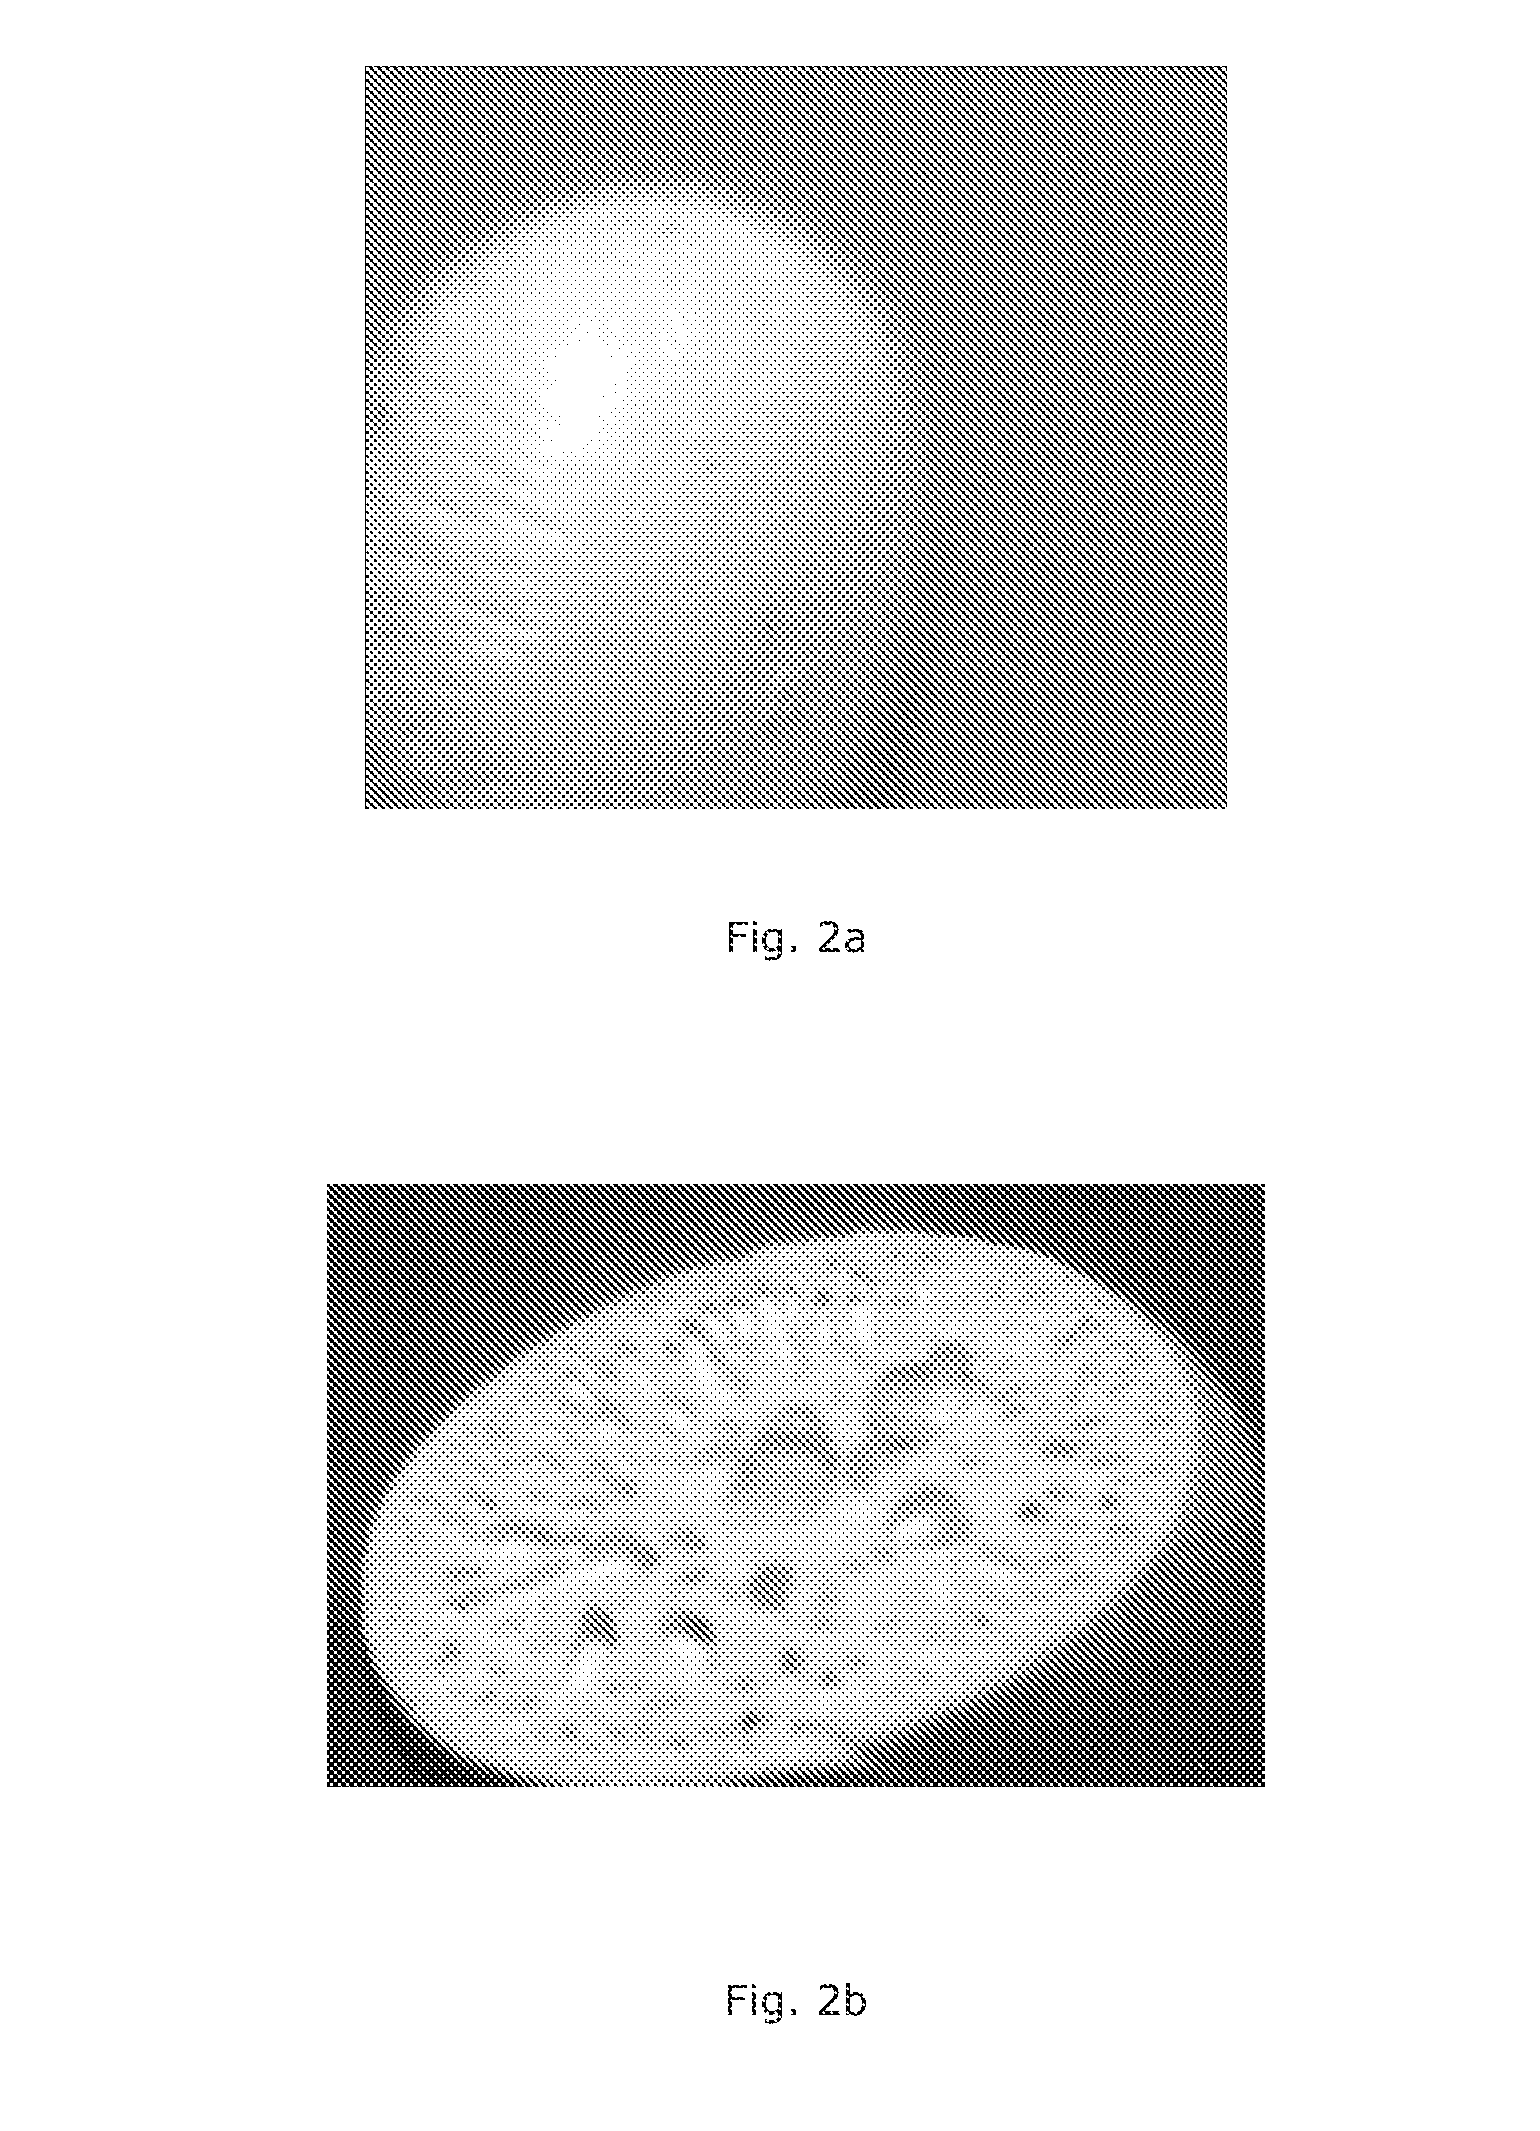 Polymer composite for extracting cesium from nuclear waste and/or other inorganic wastes/solutions